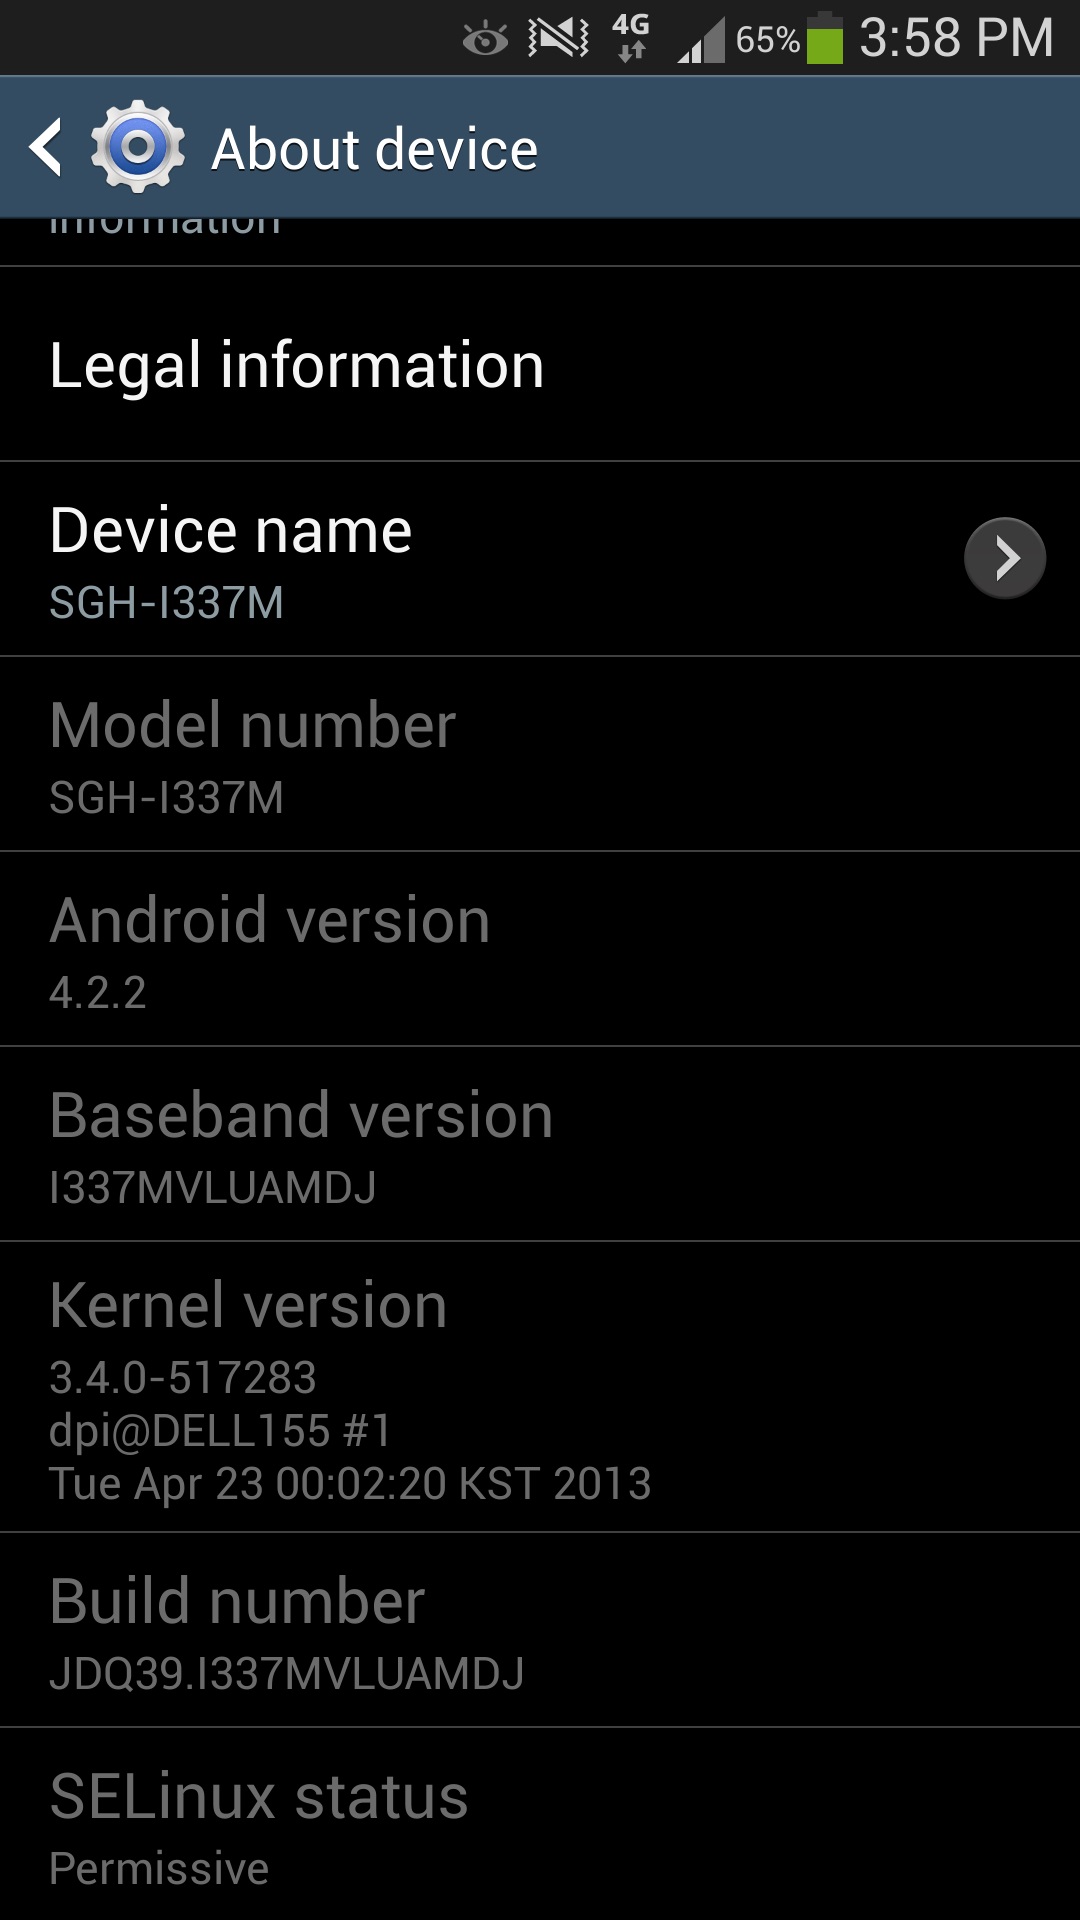 Picture of device information showing android operating system version